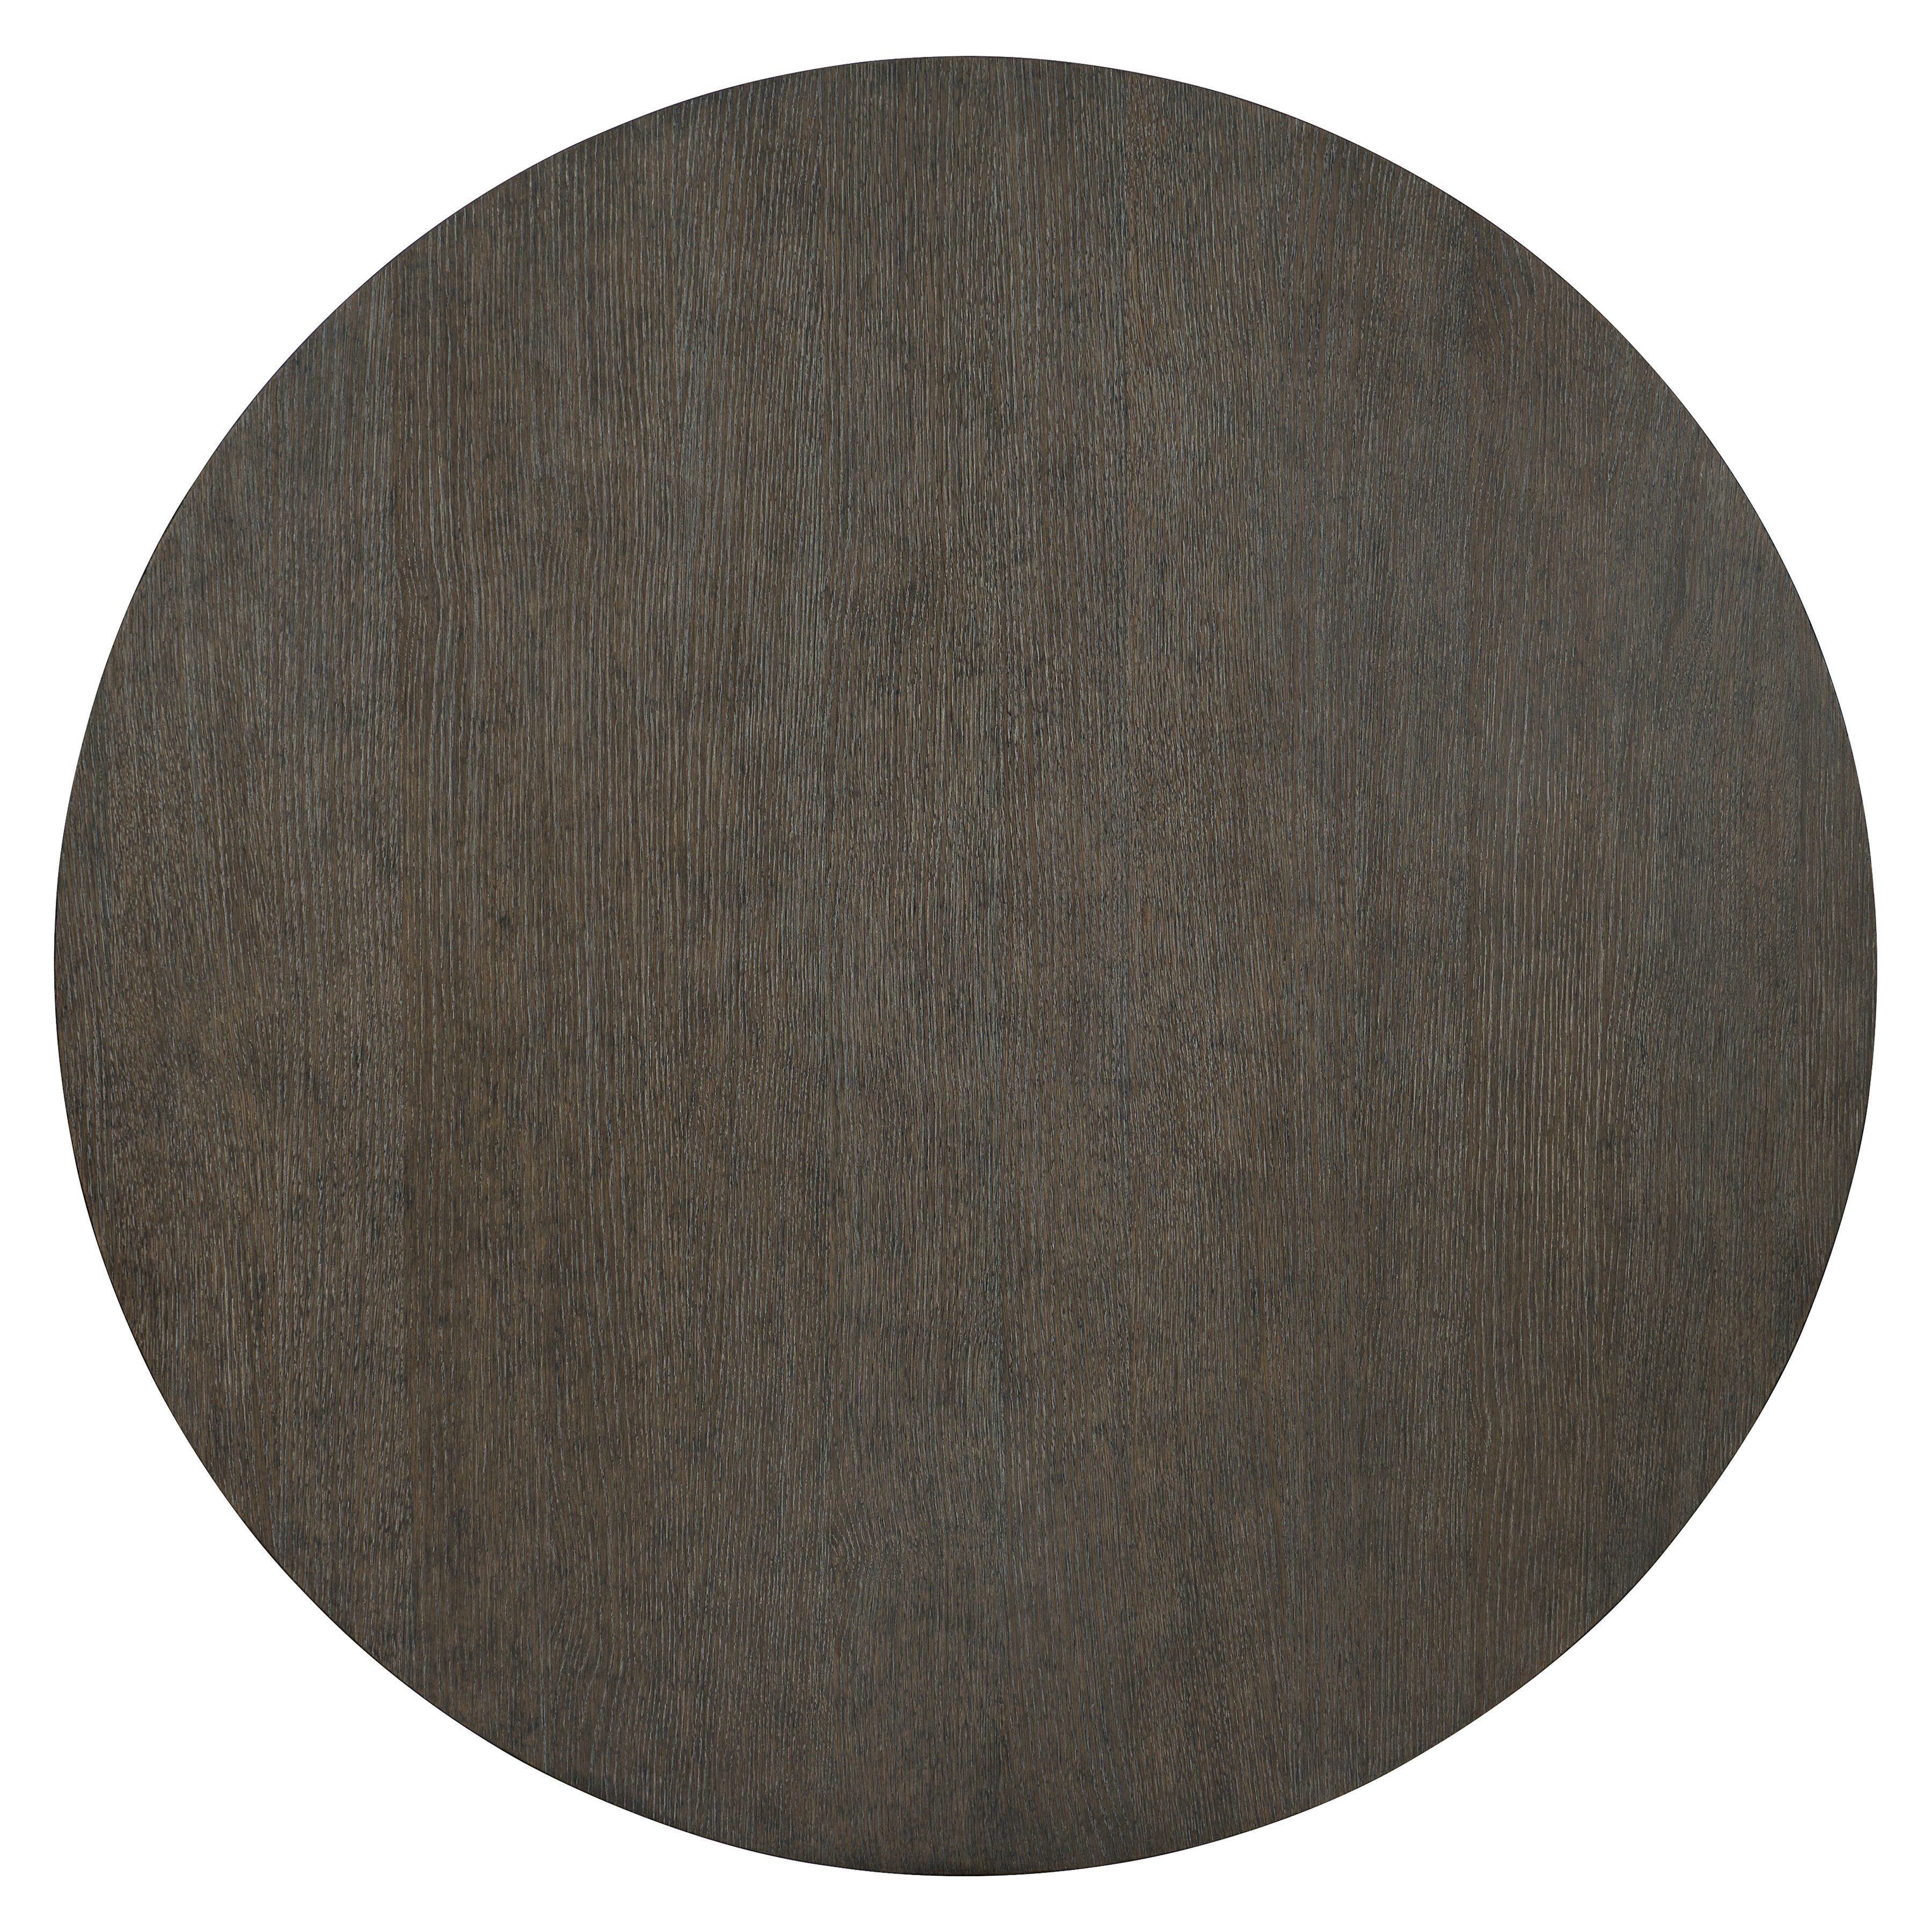 Linea Round Dining Table